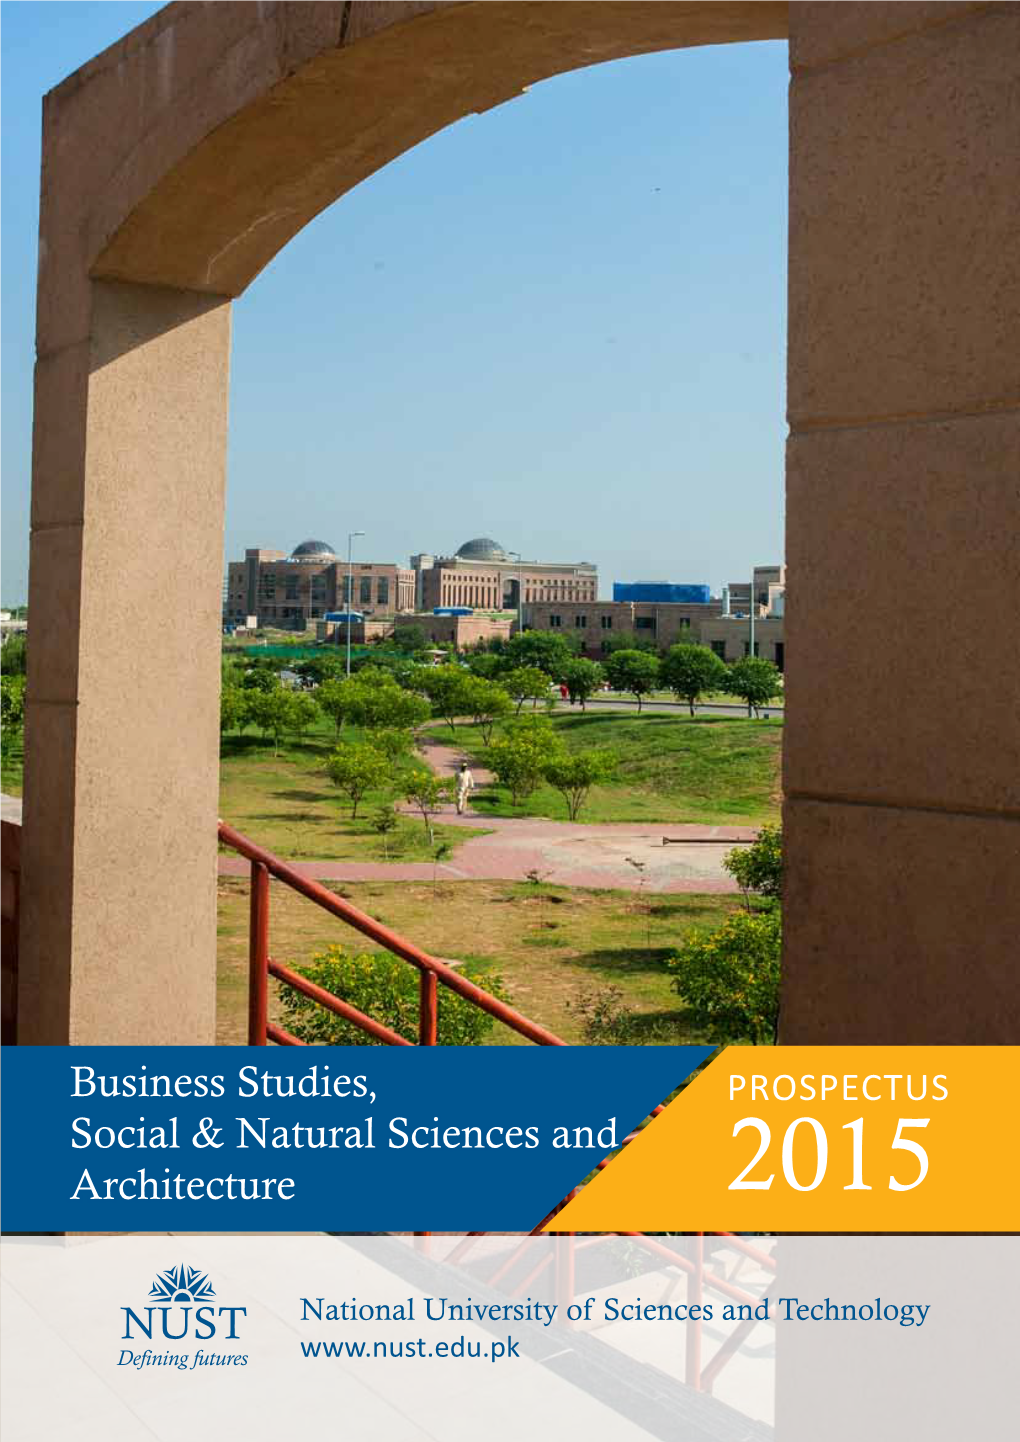 Business Studies, Social & Natural Sciences and Architecture